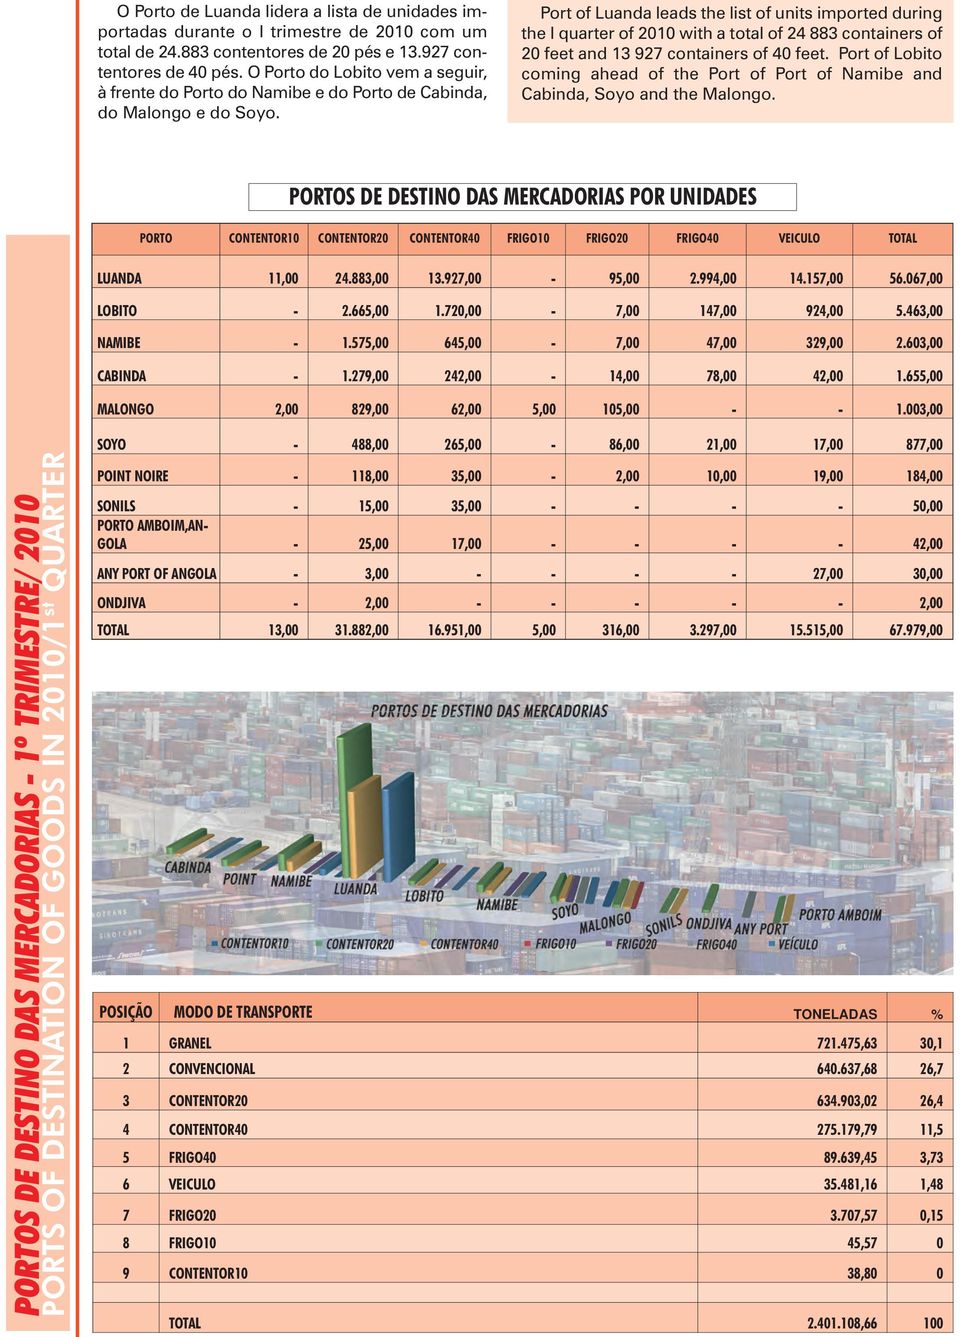 Port of Luanda leads the list of units imported during the I quarter of 2010 with a total of 24 883 containers of 20 feet and 13 927 containers of 40 feet.